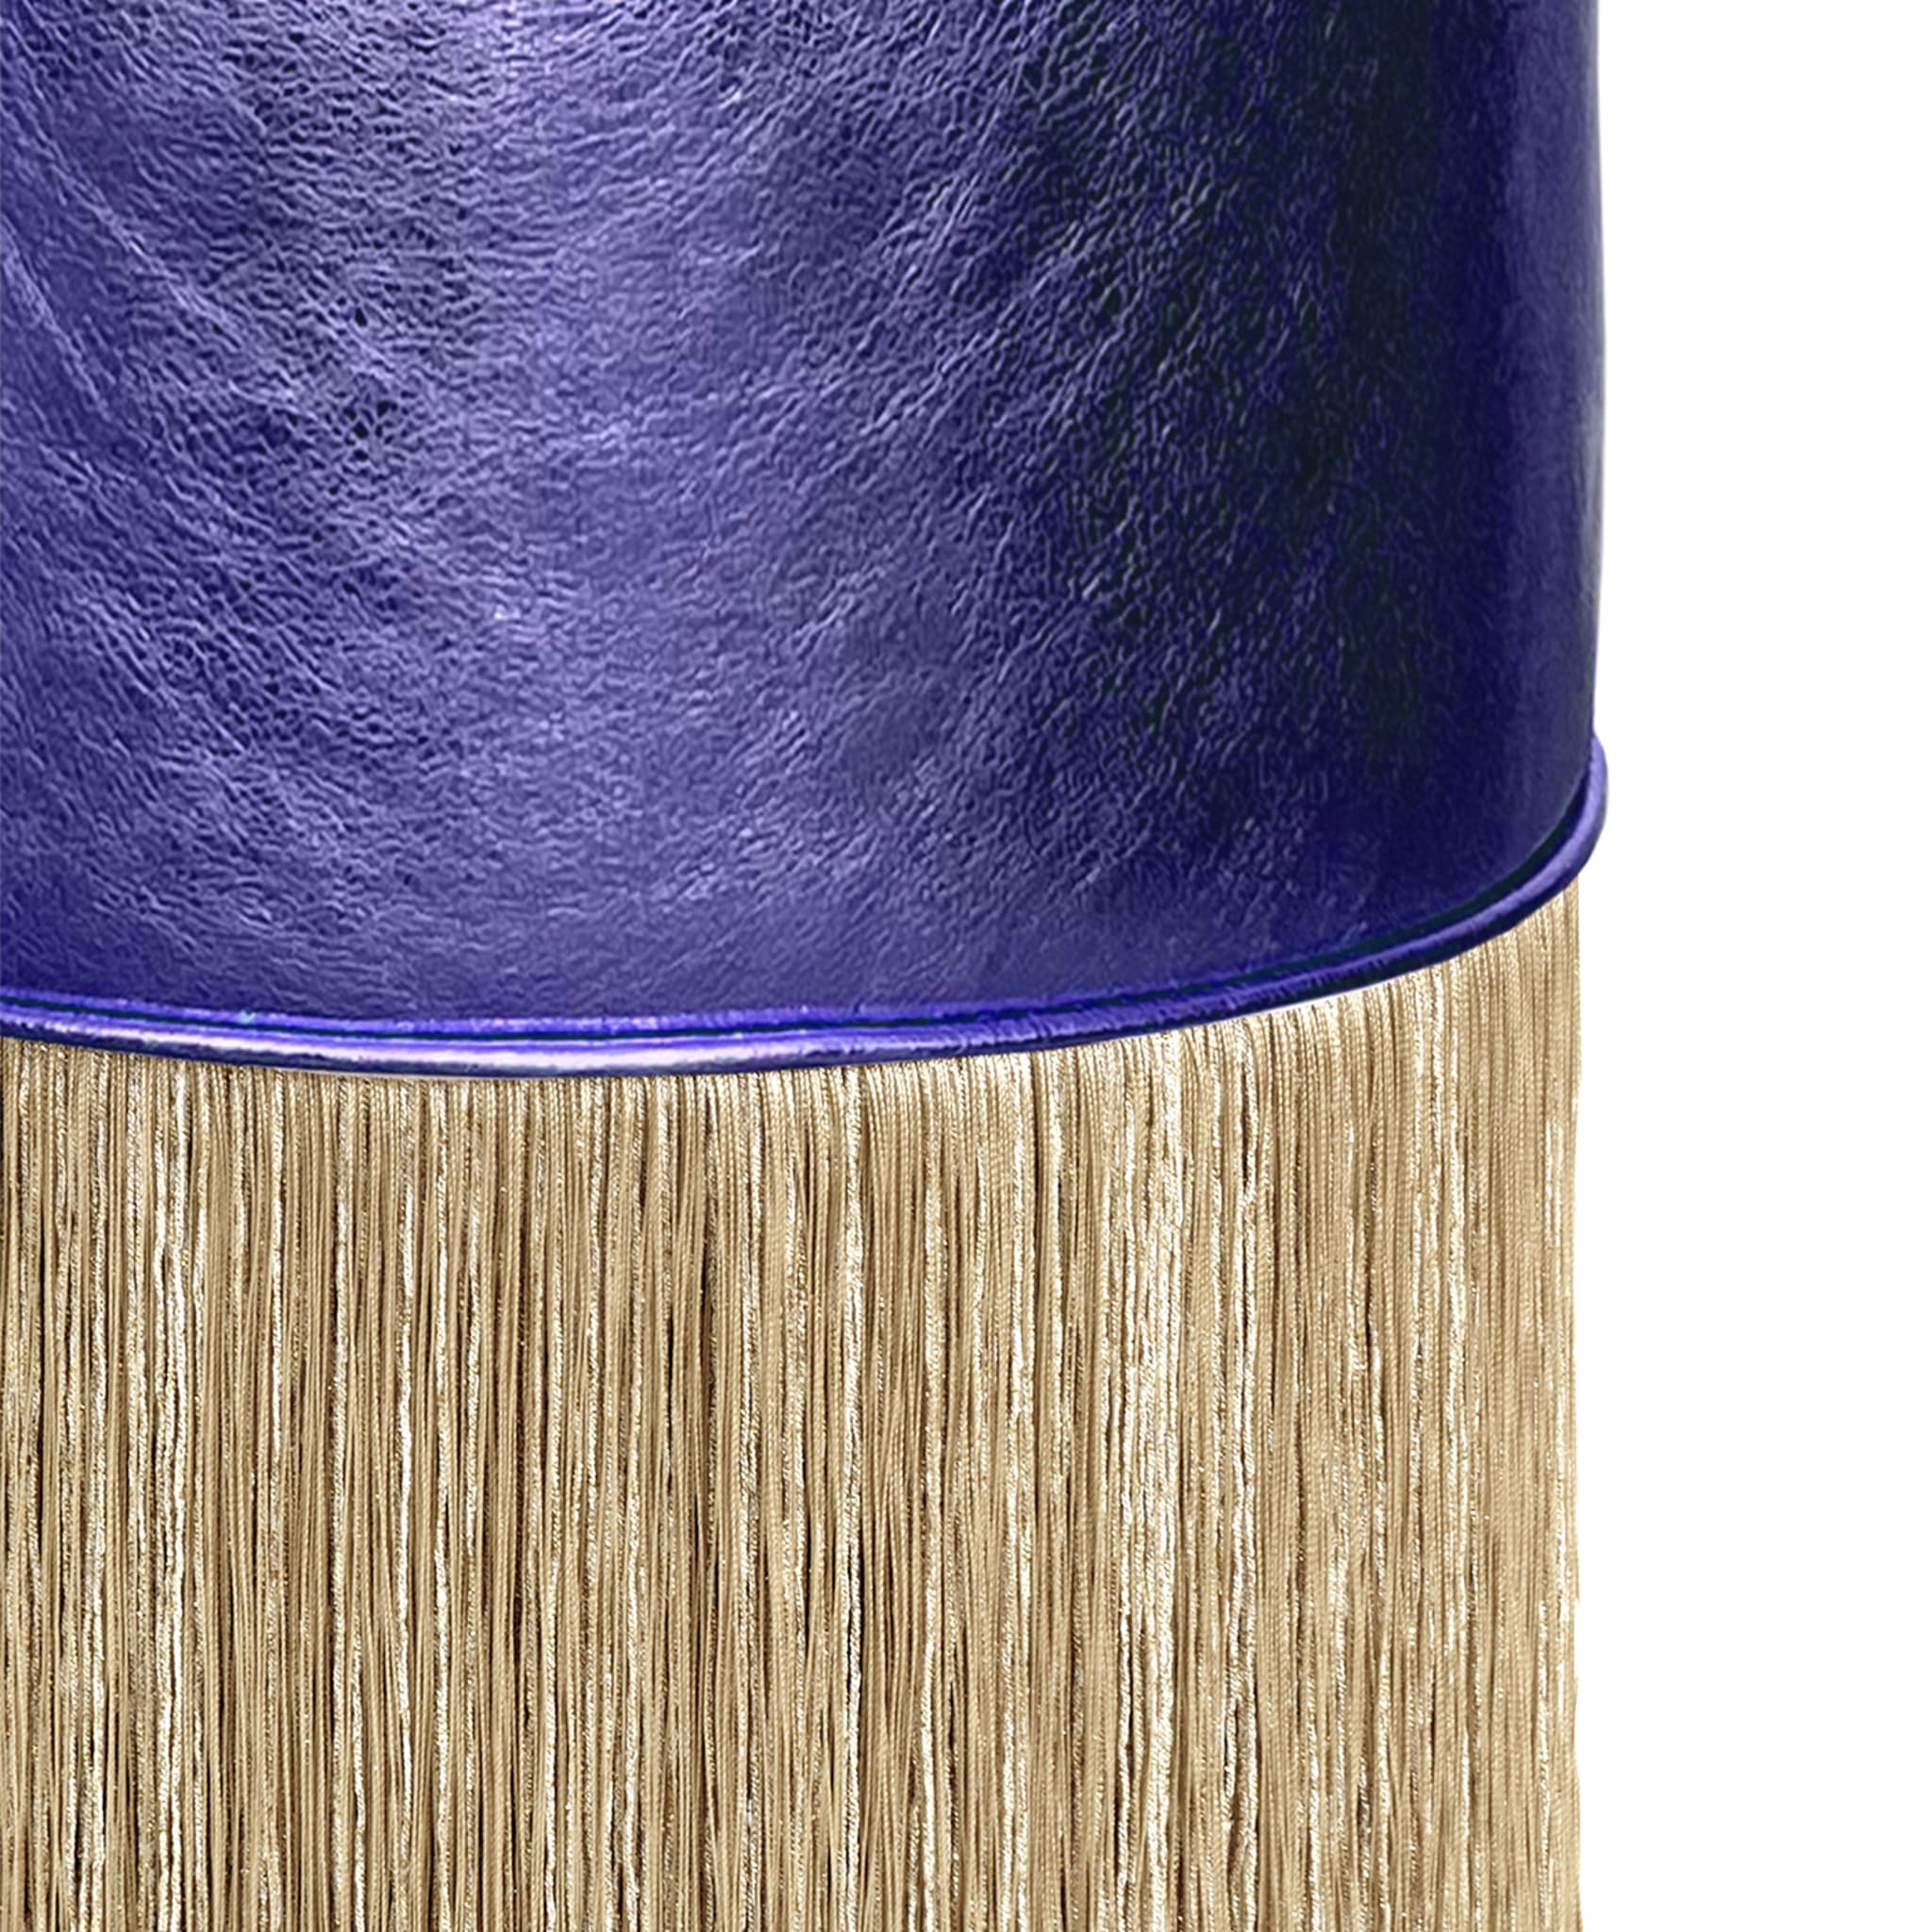 Gleaming Purple Leather Gold Fringes Pouf by Lorenza Bozzoli - Alternative view 1